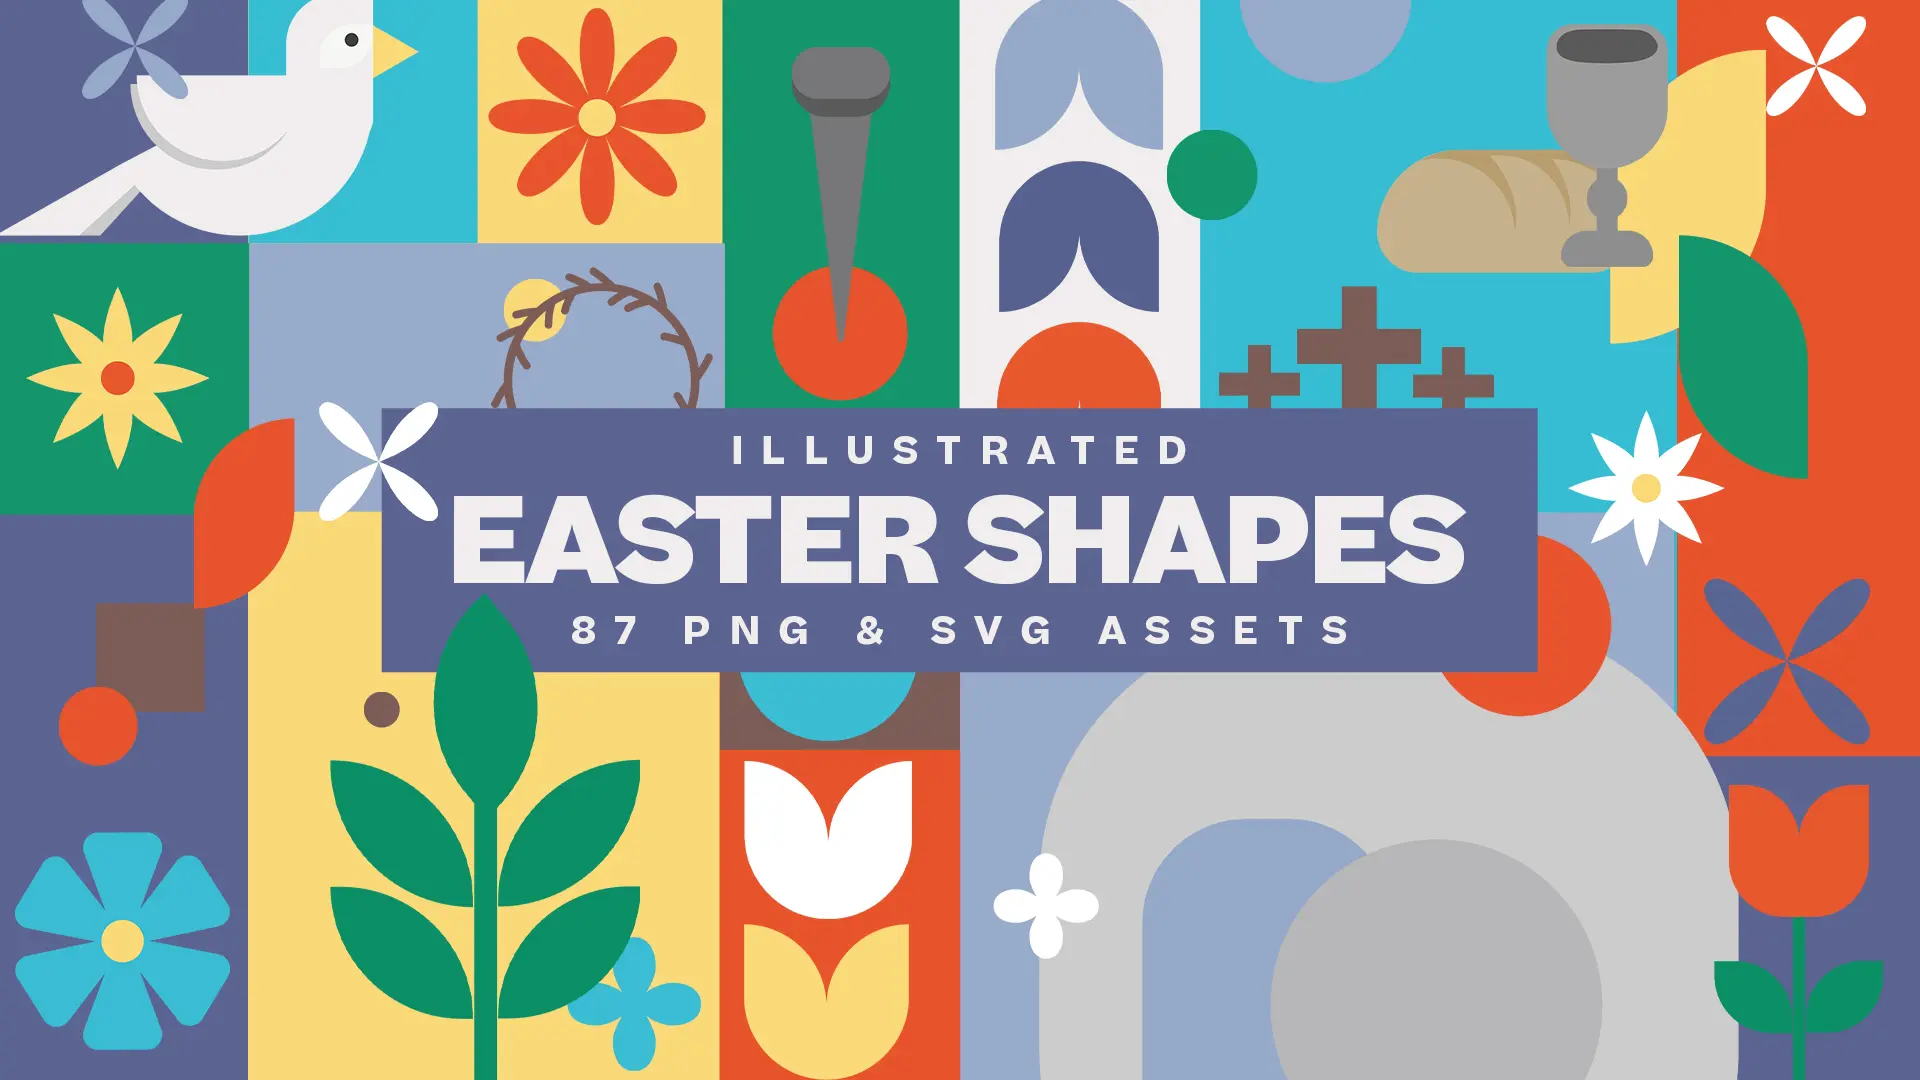 This Vibrant Church Media Toolkit Features &Quot;Illustrated Easter Shapes,&Quot; A Collection Of 87 Png And Svg Assets, Bringing A Playful And Modern Visual Storytelling Element To Easter Celebrations.